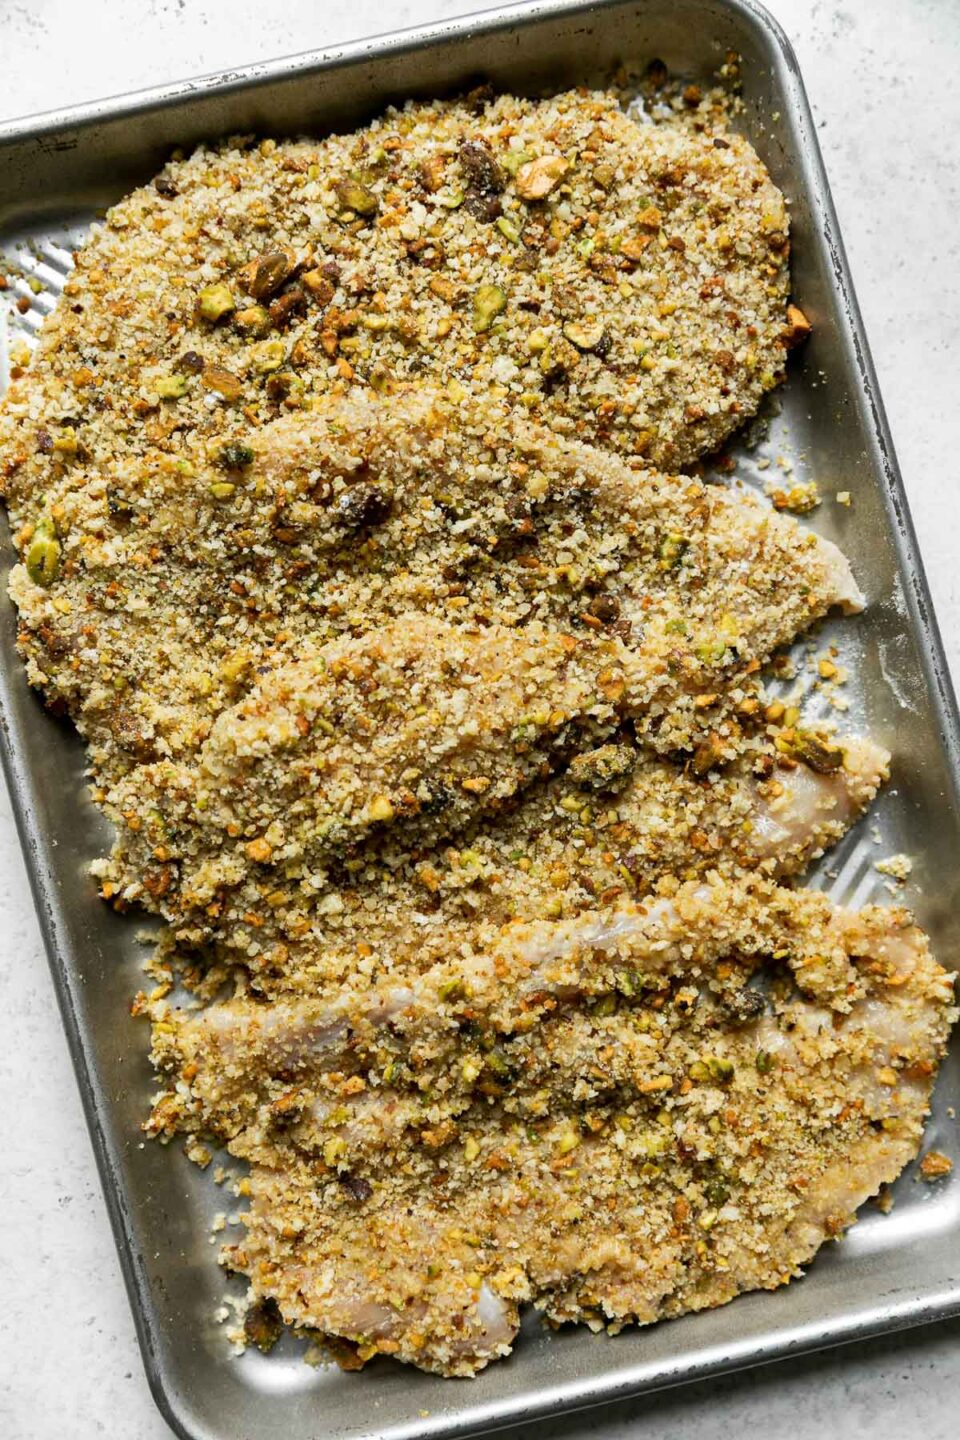 An aluminum baking sheet is filled with Parmesan Pistachio Crusted Chicken cutlets that have been breaded and prepared for cooking. The baking sheet sits atop a creamy white textured surface.